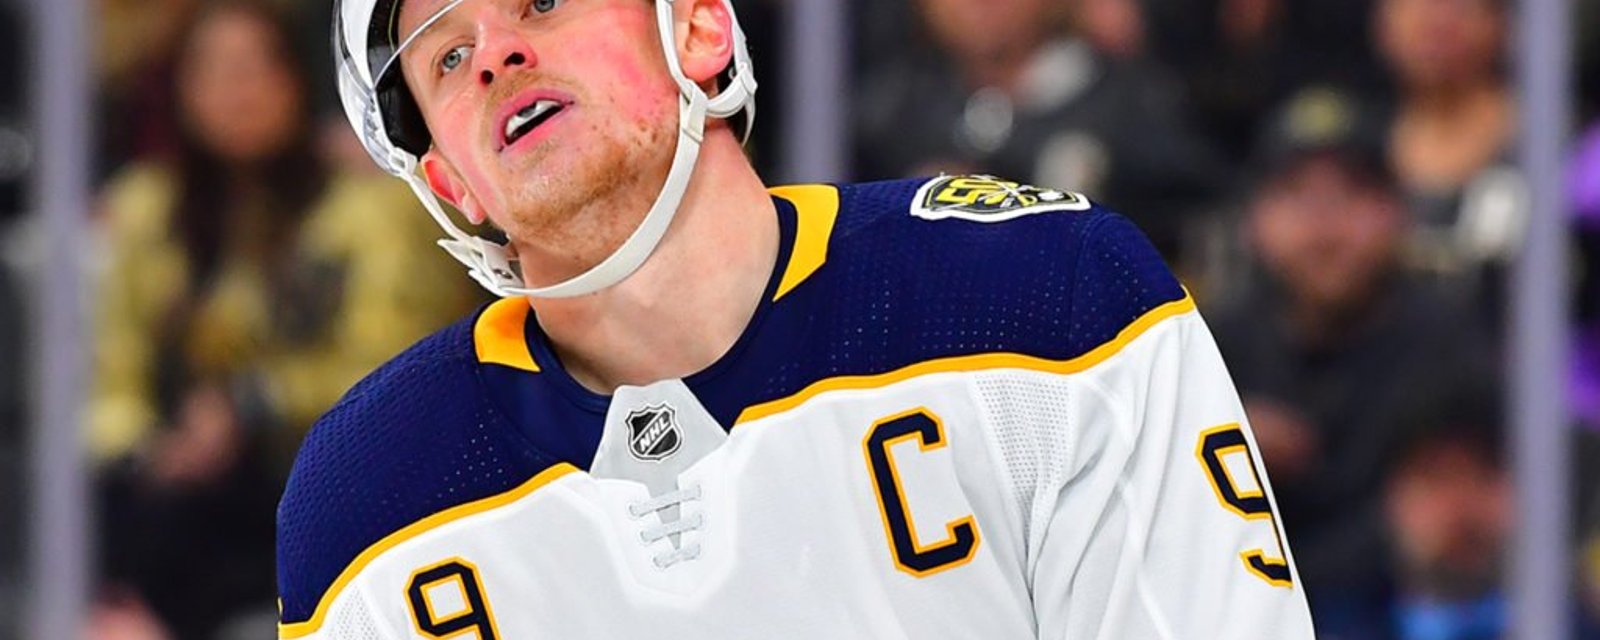 Ludicrous rumour comes out about Jack Eichel!